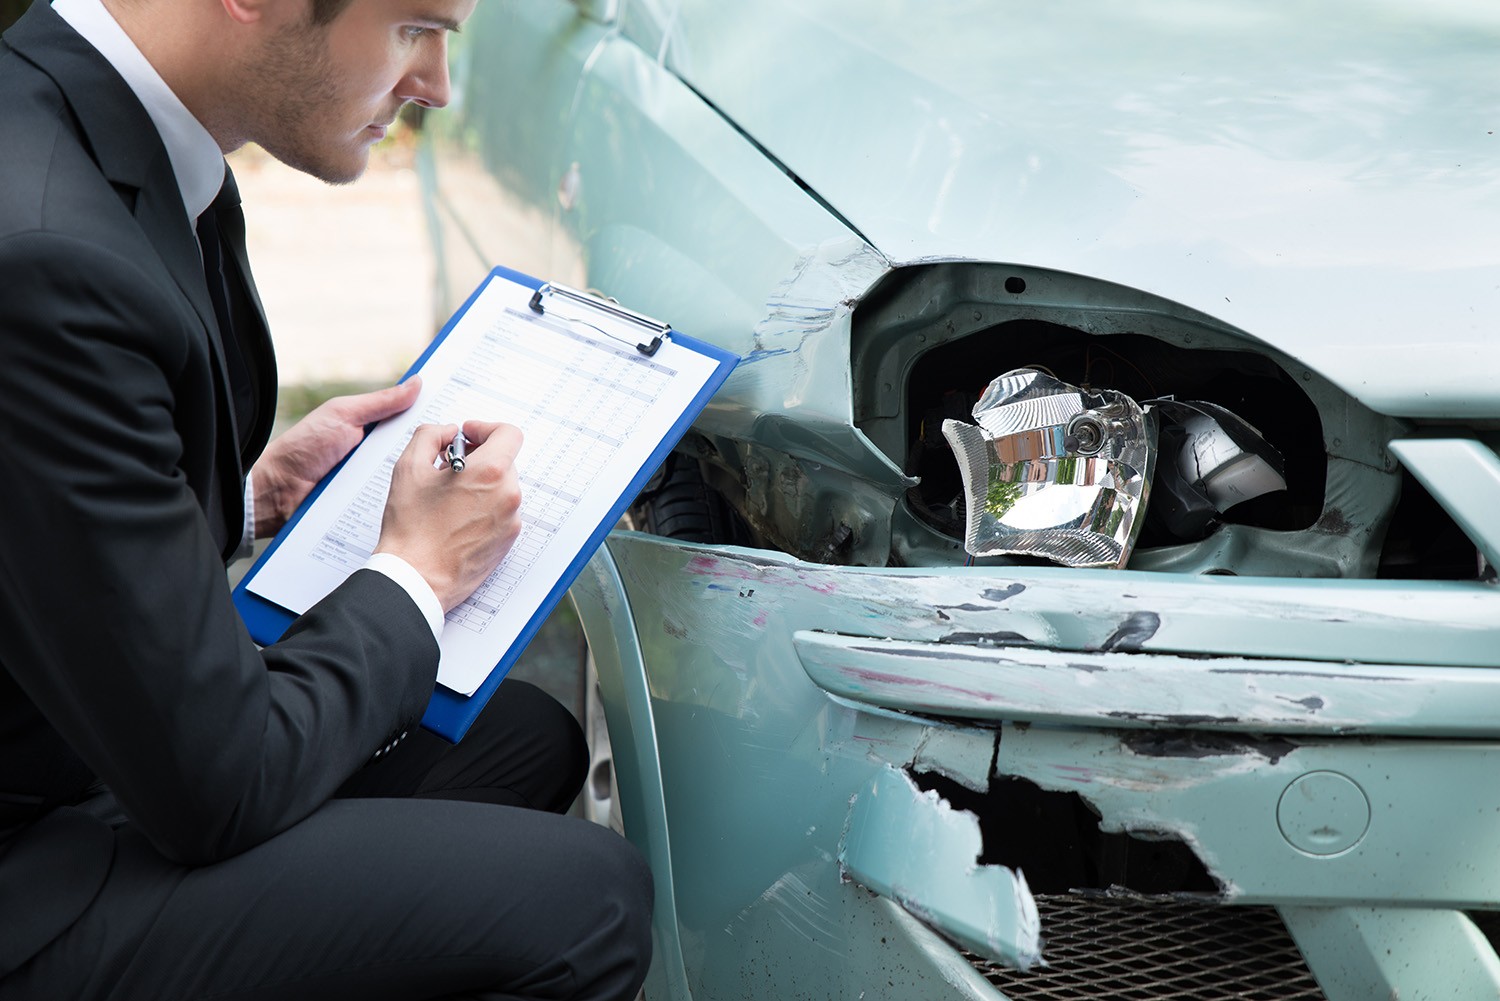 Should I Hire a Lawyer for a Non-fault Accident?